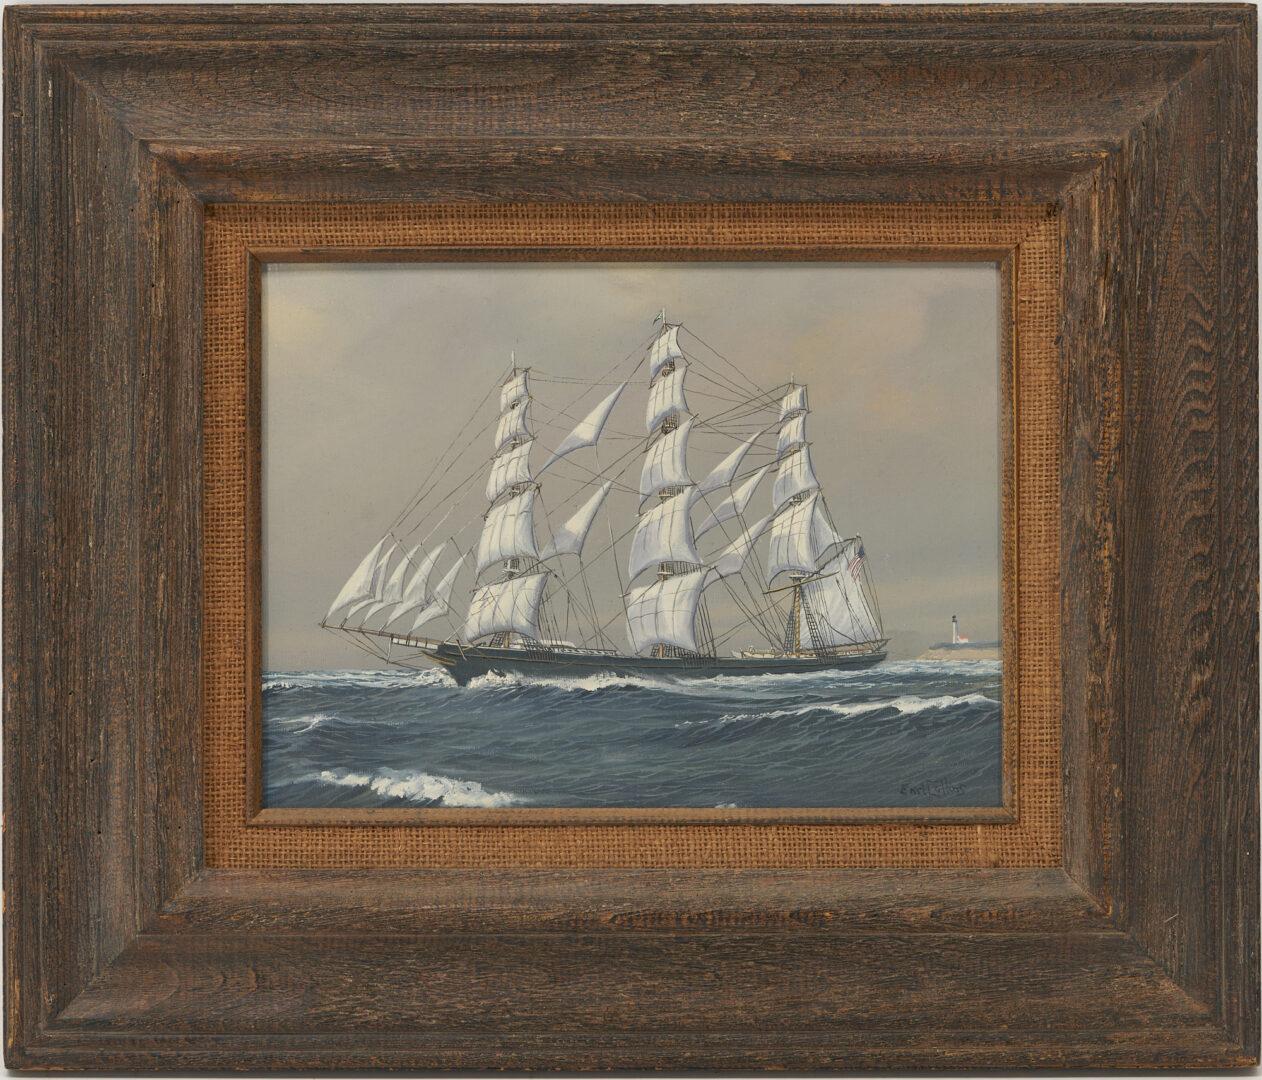 Lot 268: Earl E. Collins O/C Small Marine Ship Painting, Sovereign of the Seas